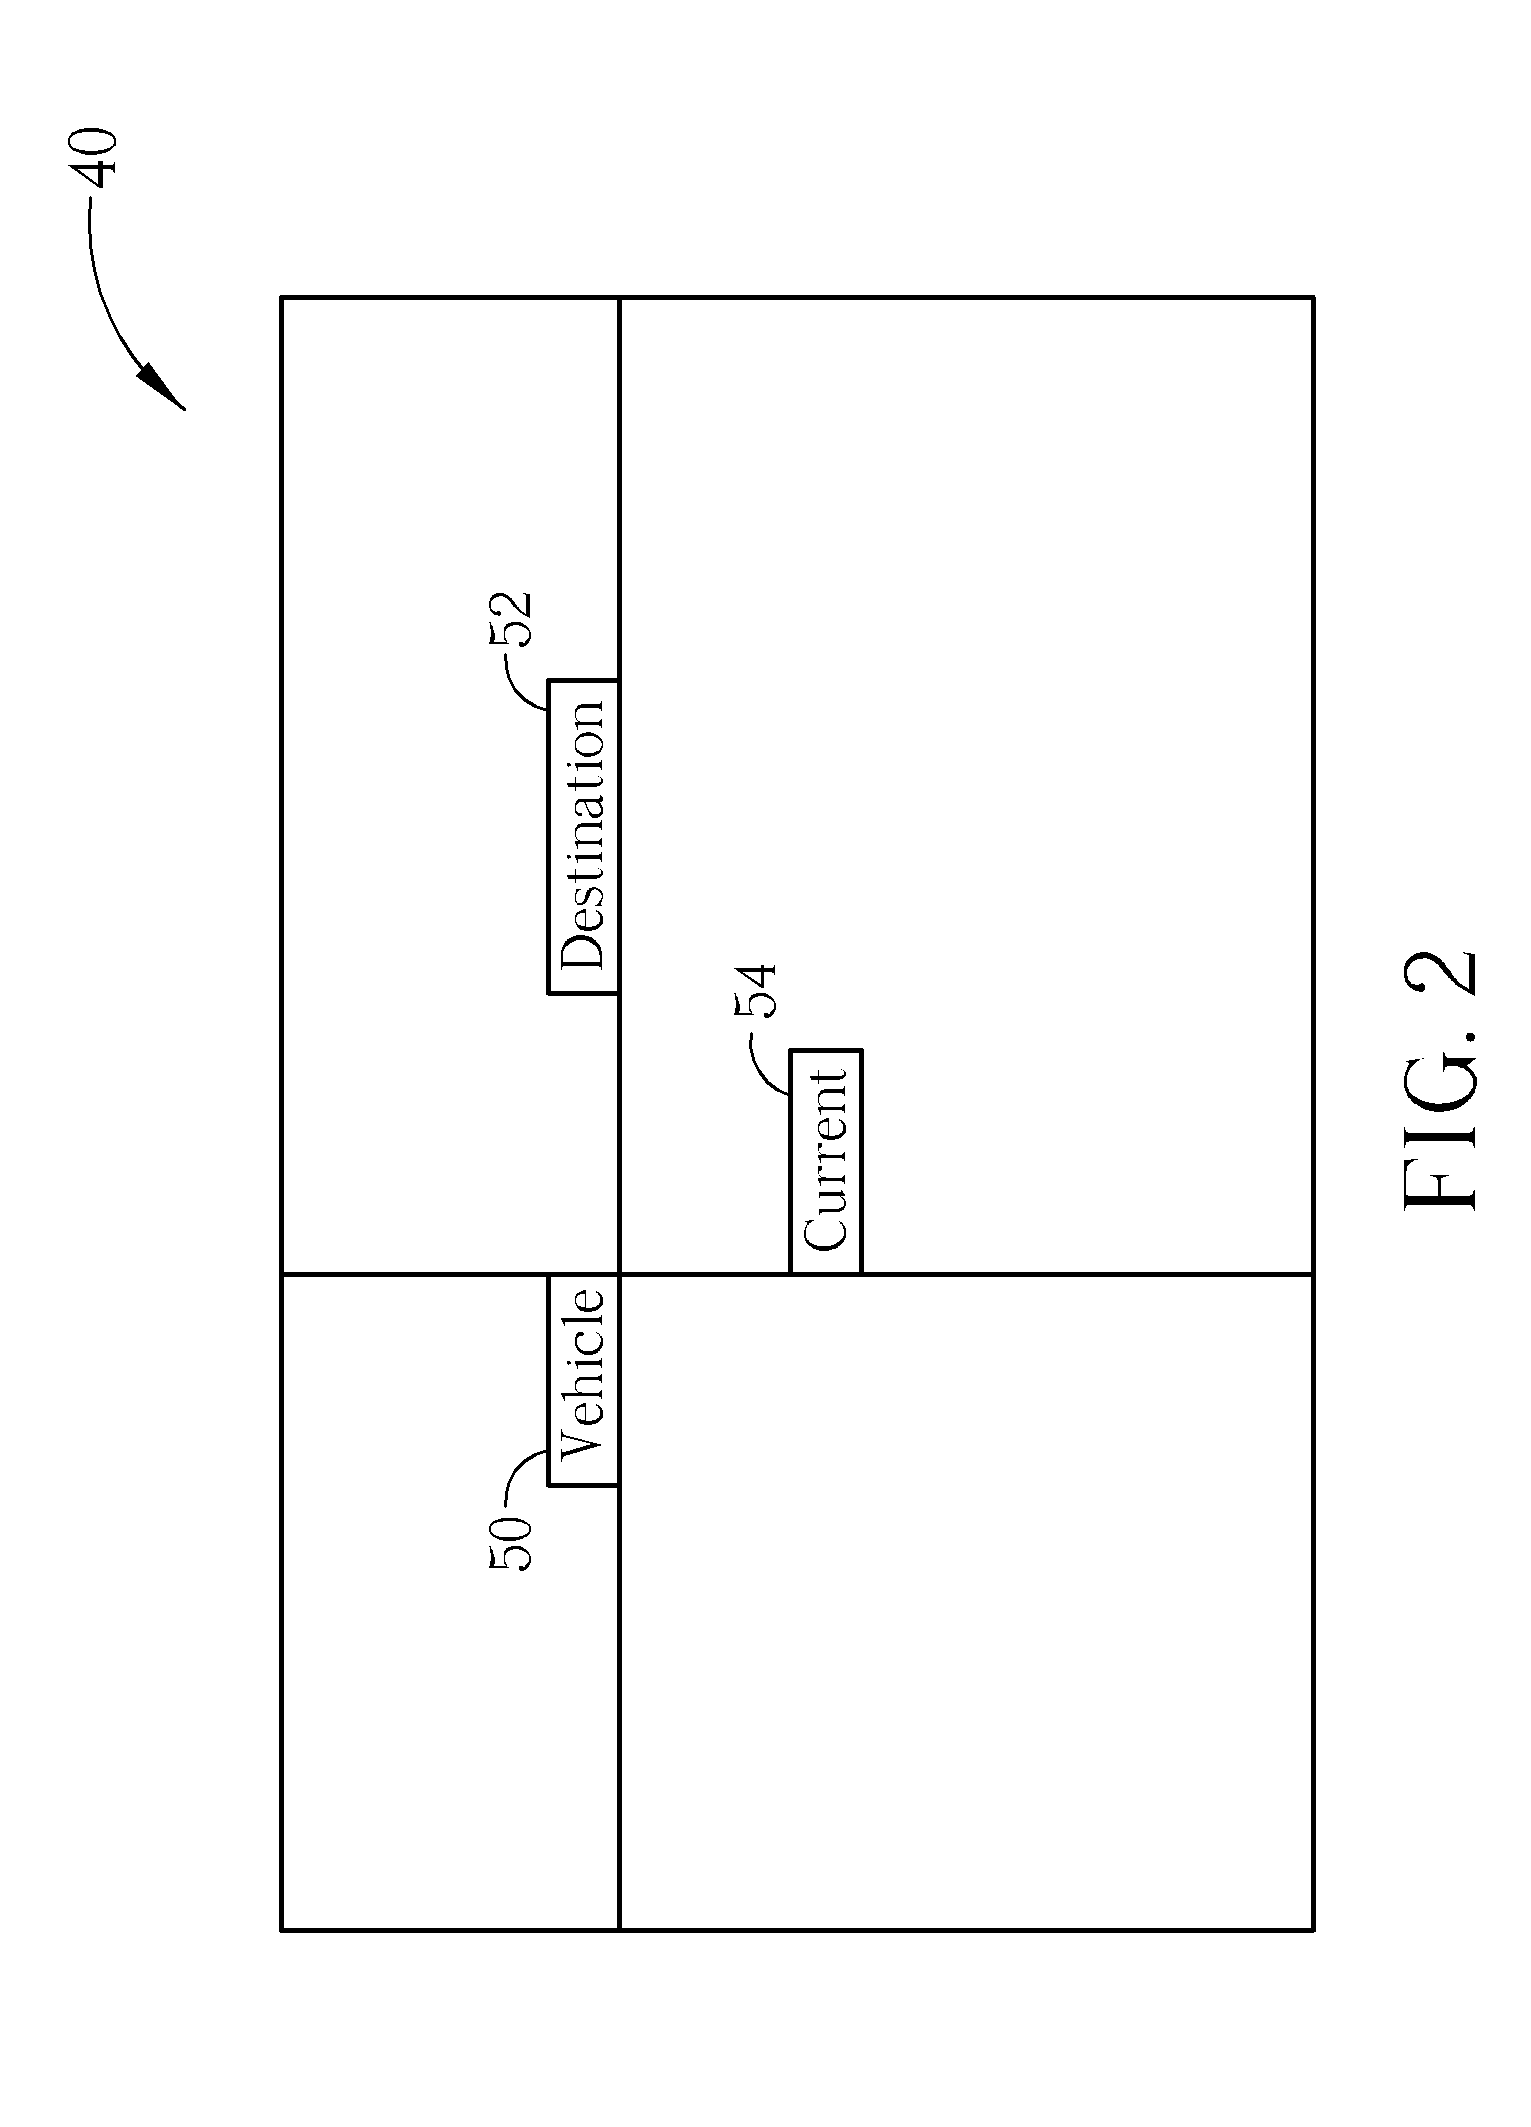 Methods of assisting a user with selecting a route after a personal navigation device transitions from driving mode to walking mode